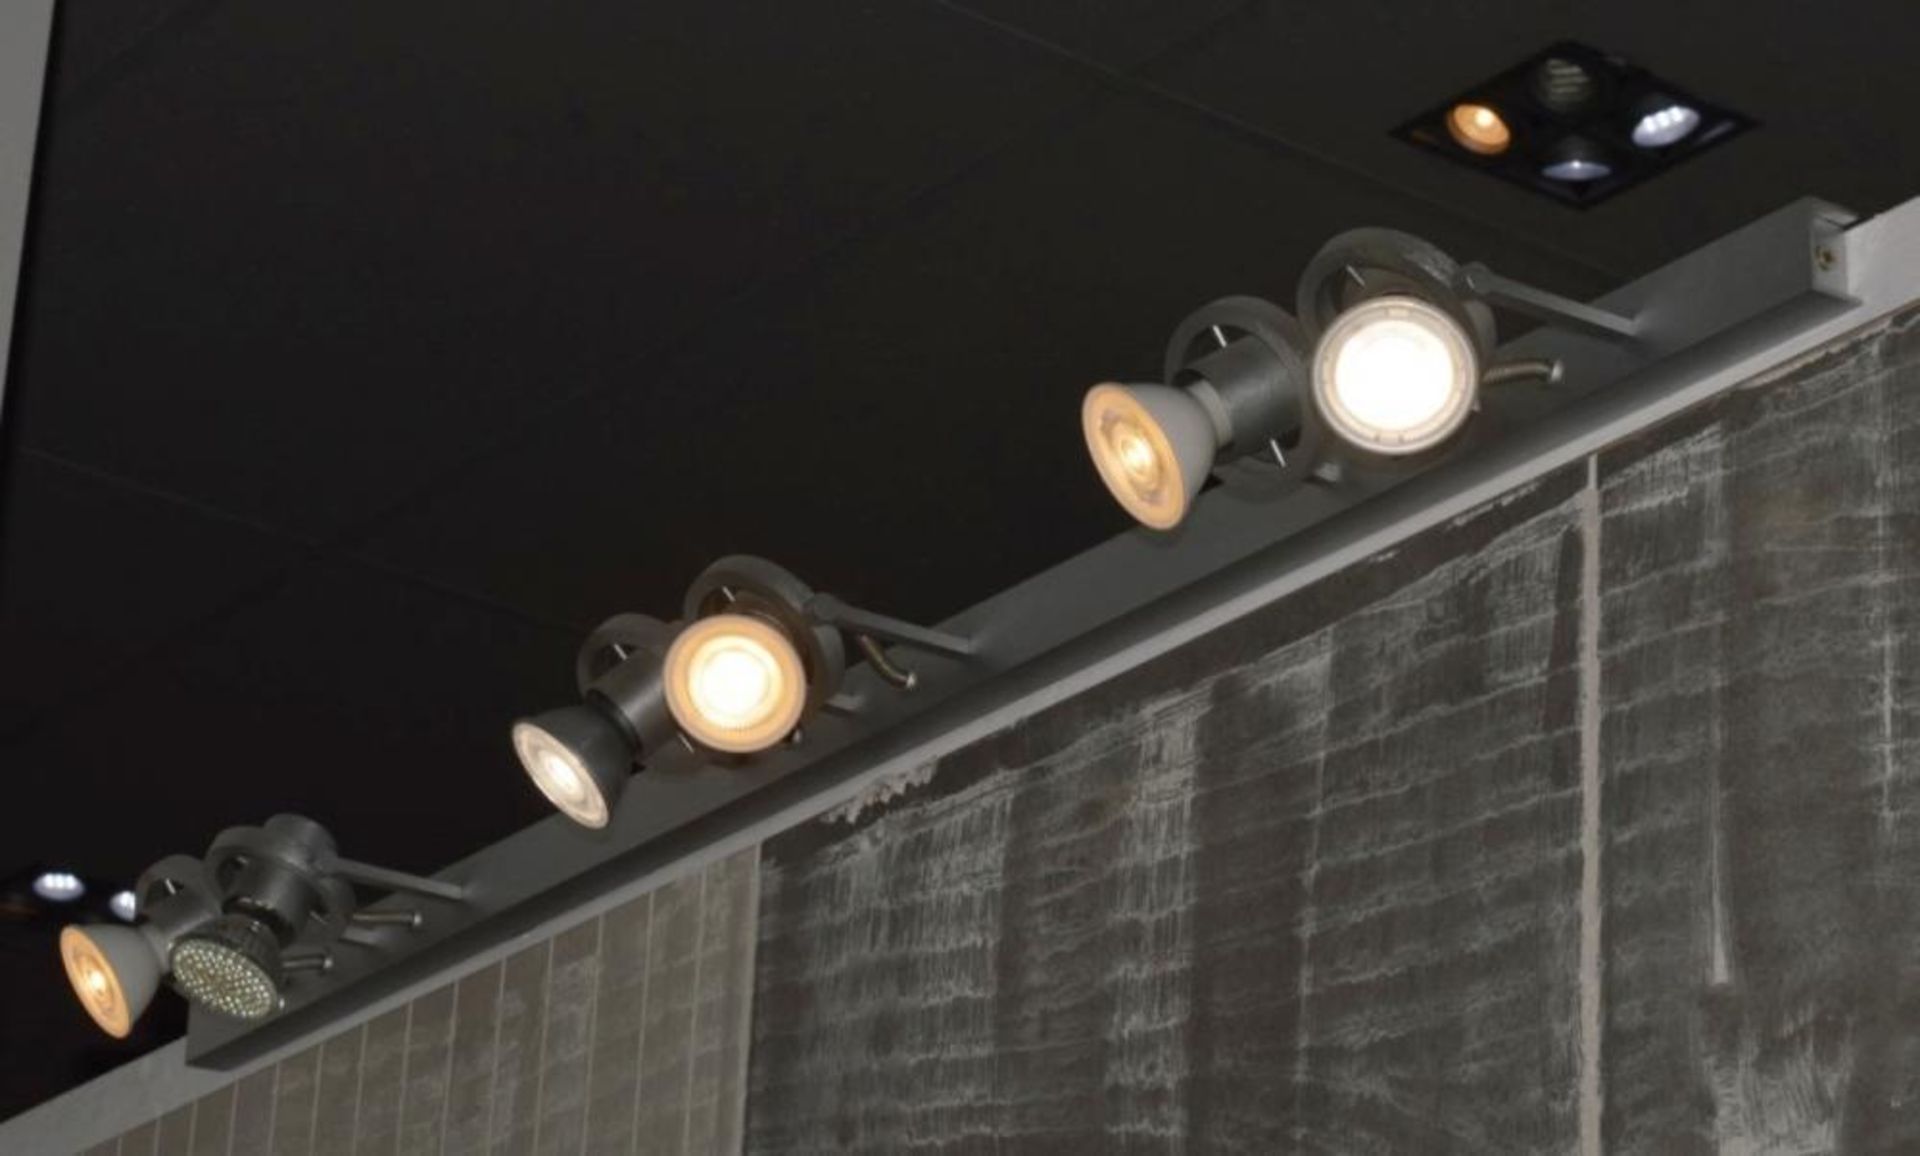 8 x Triple Spotlight Retail Display Lighting Units - Each Unit Features 6 x Spot Lights - Ideal For